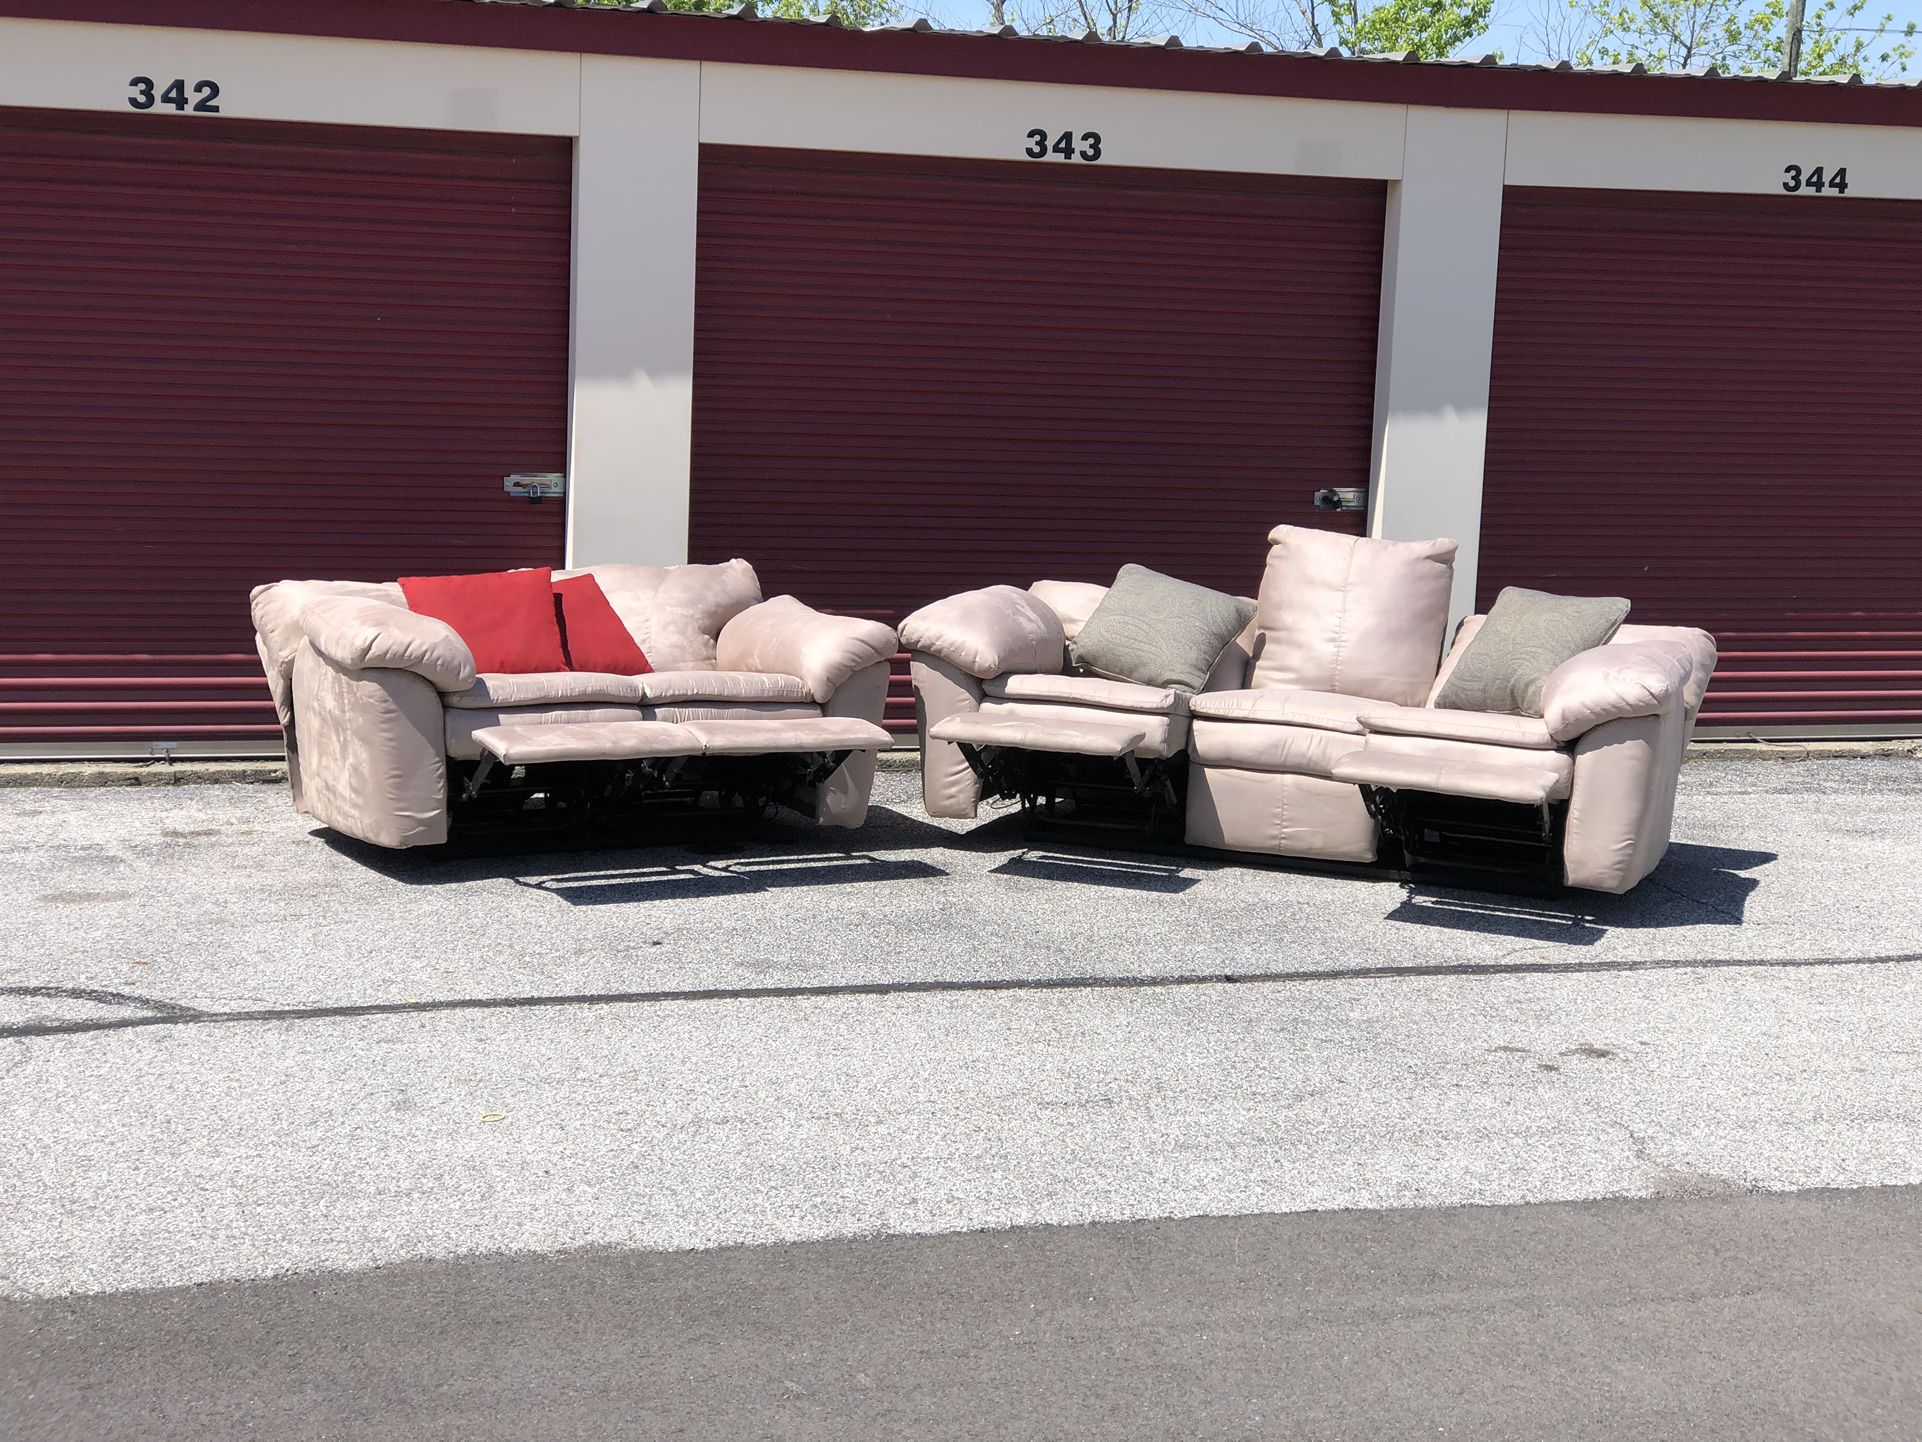 FREE delivery - Clean Recliner  Sofa Loveseat Couches Sectional